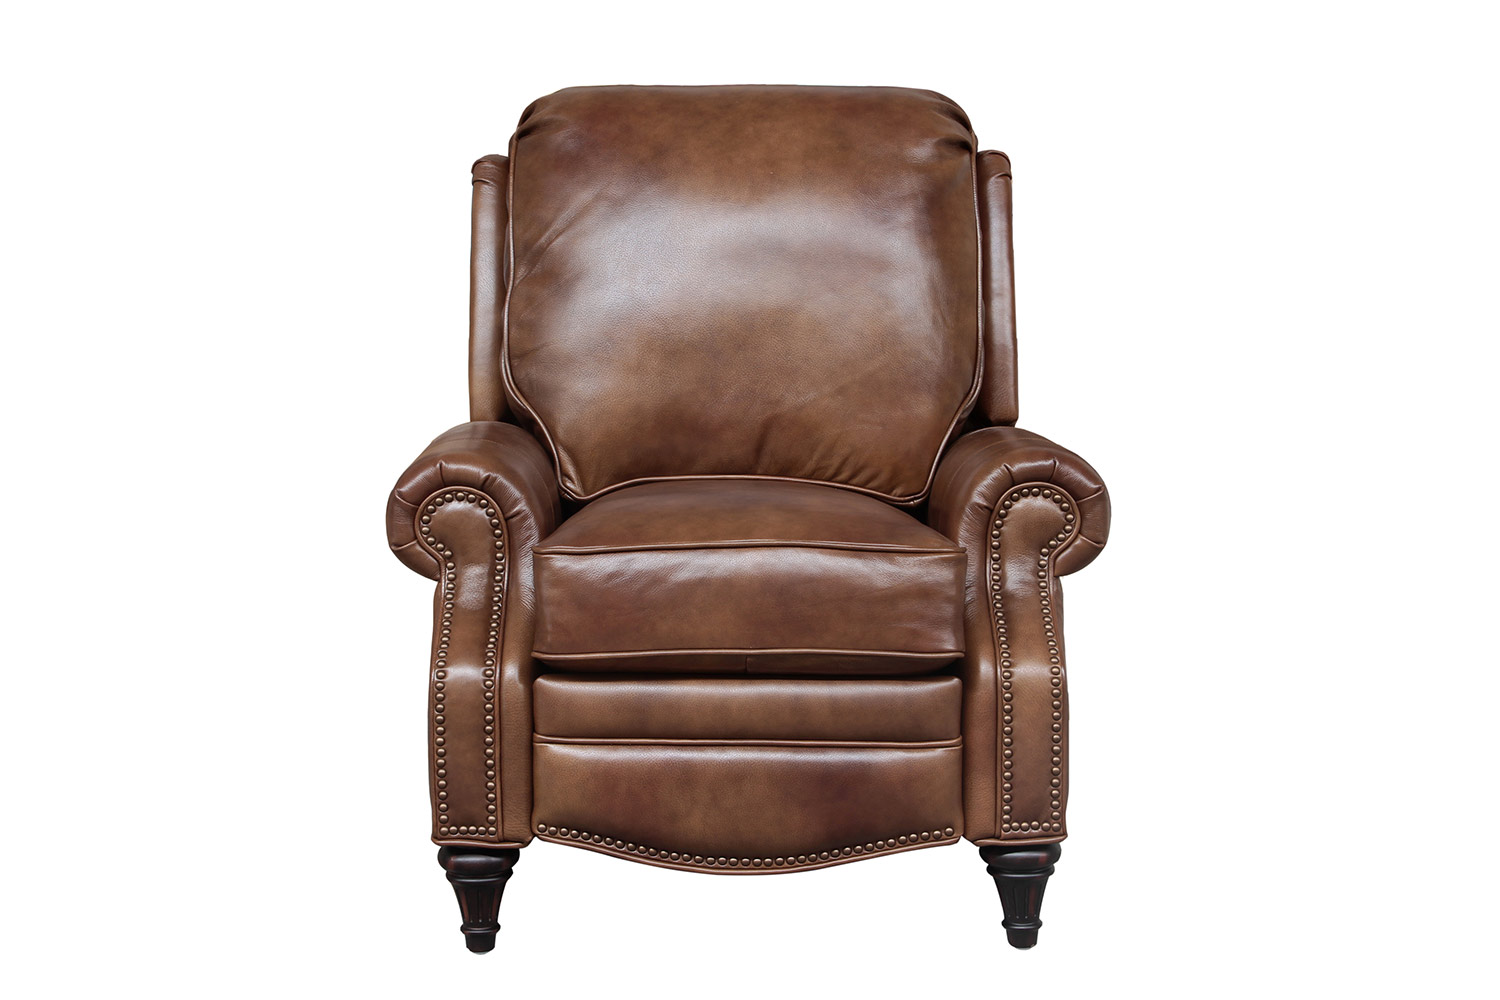 Barcalounger Avery Recliner Chair - Wenlock Tawny/All Leather